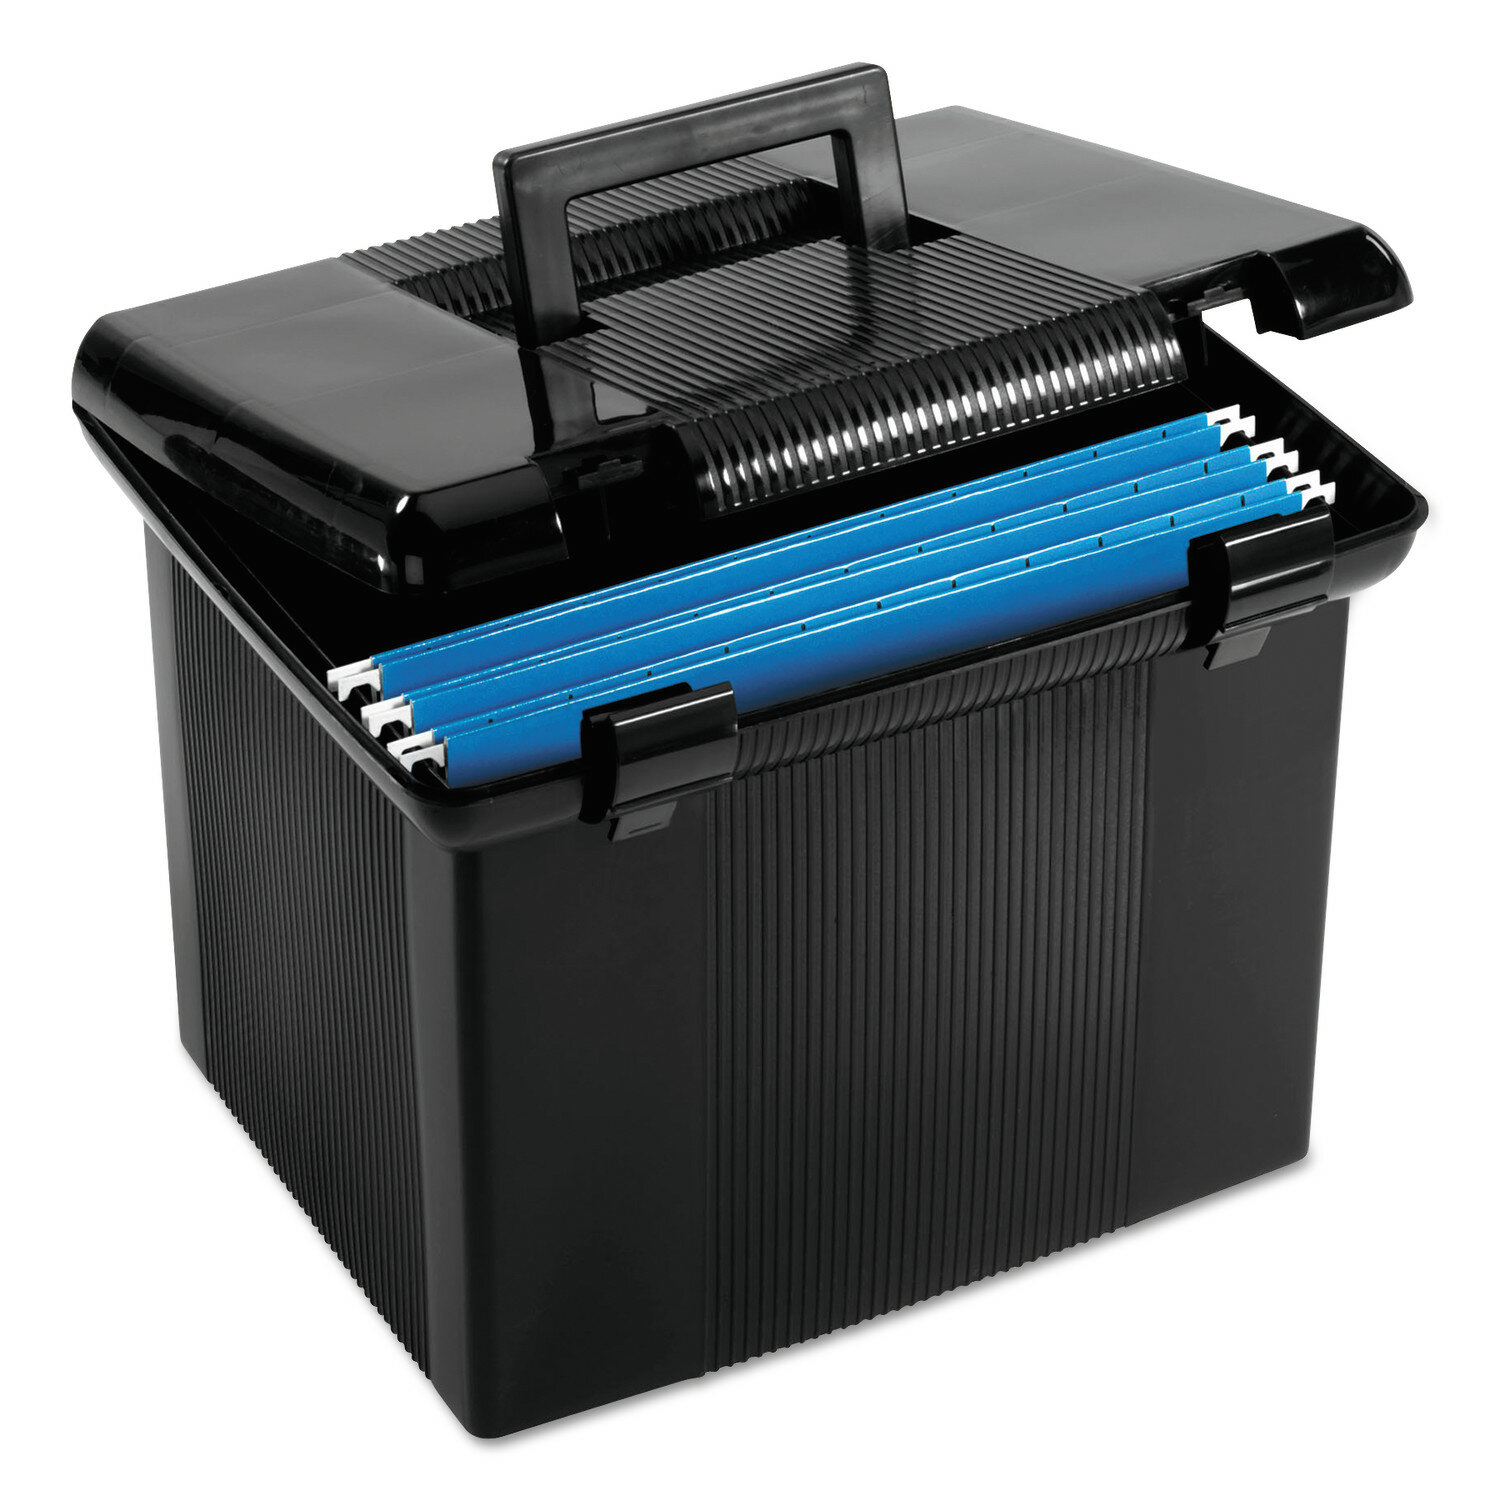 Details about   Storex Portable File Box with Organizer Lid Letter... 17.13 x 9.63 x 11 Inches 